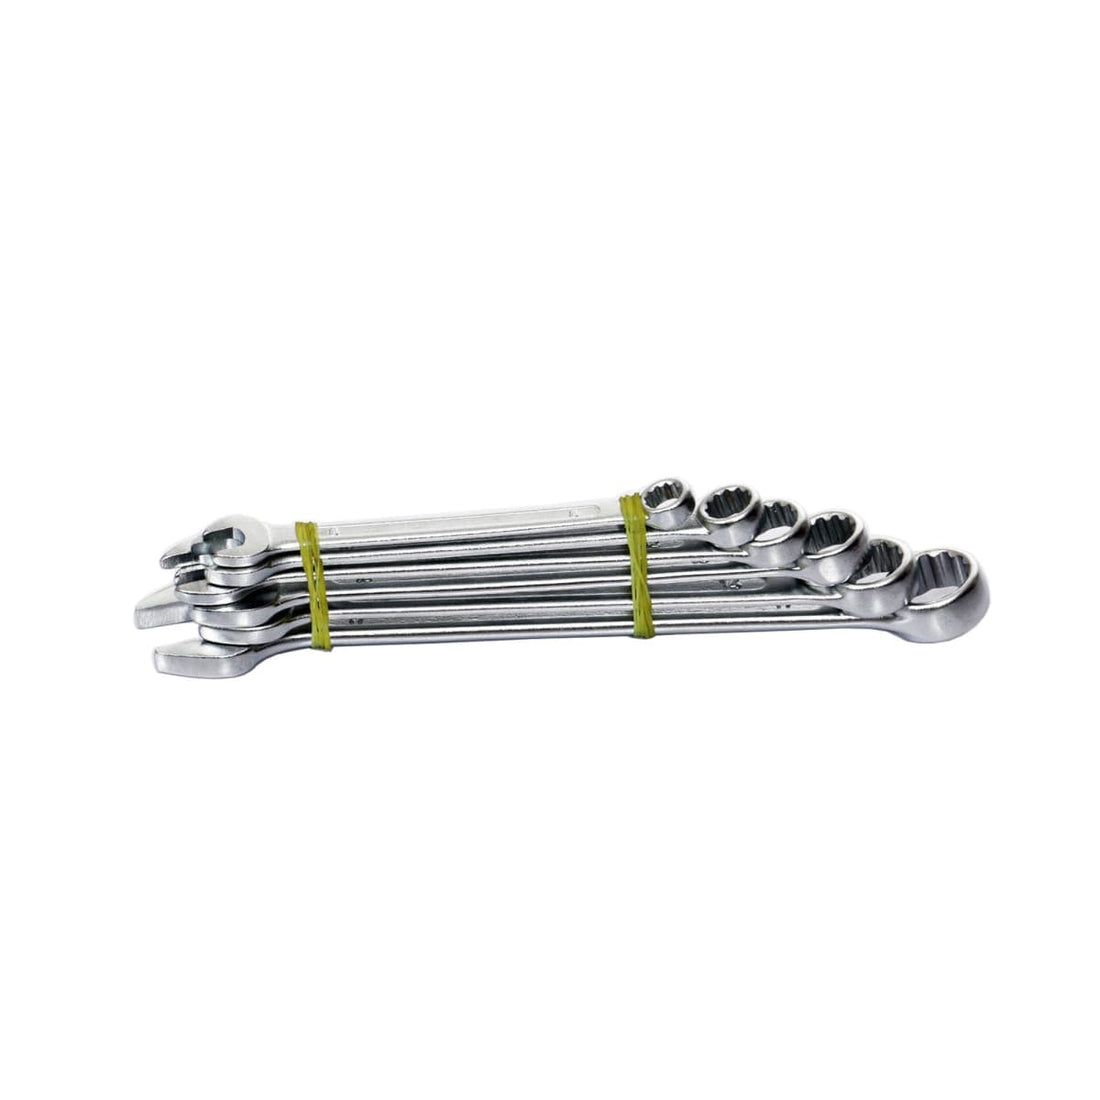 SET 6 COMBINATION SPANNERS ASSORTED SIZES, FORGED STEEL - best price from Maltashopper.com BR400240119